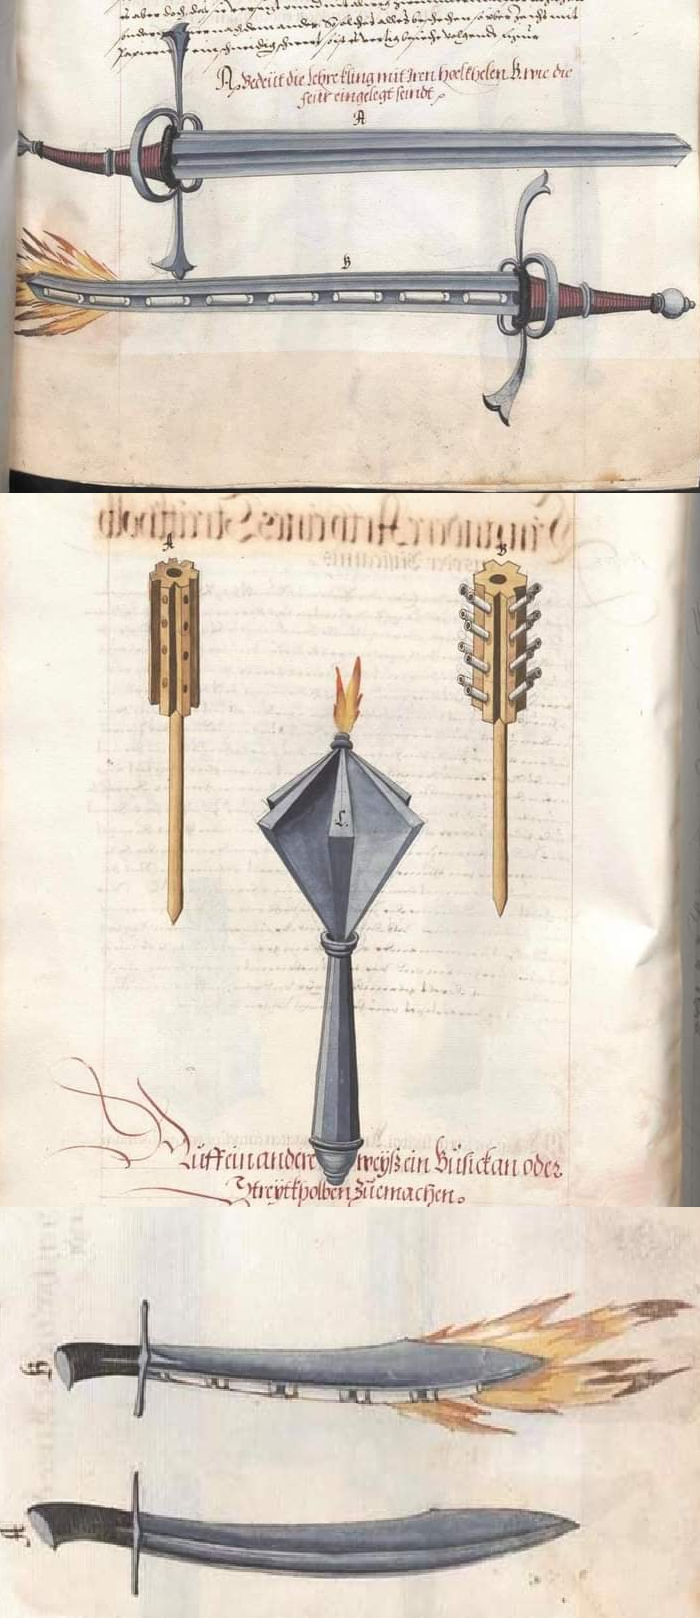 Gunpowder powered flame weapon designs from 1594.png